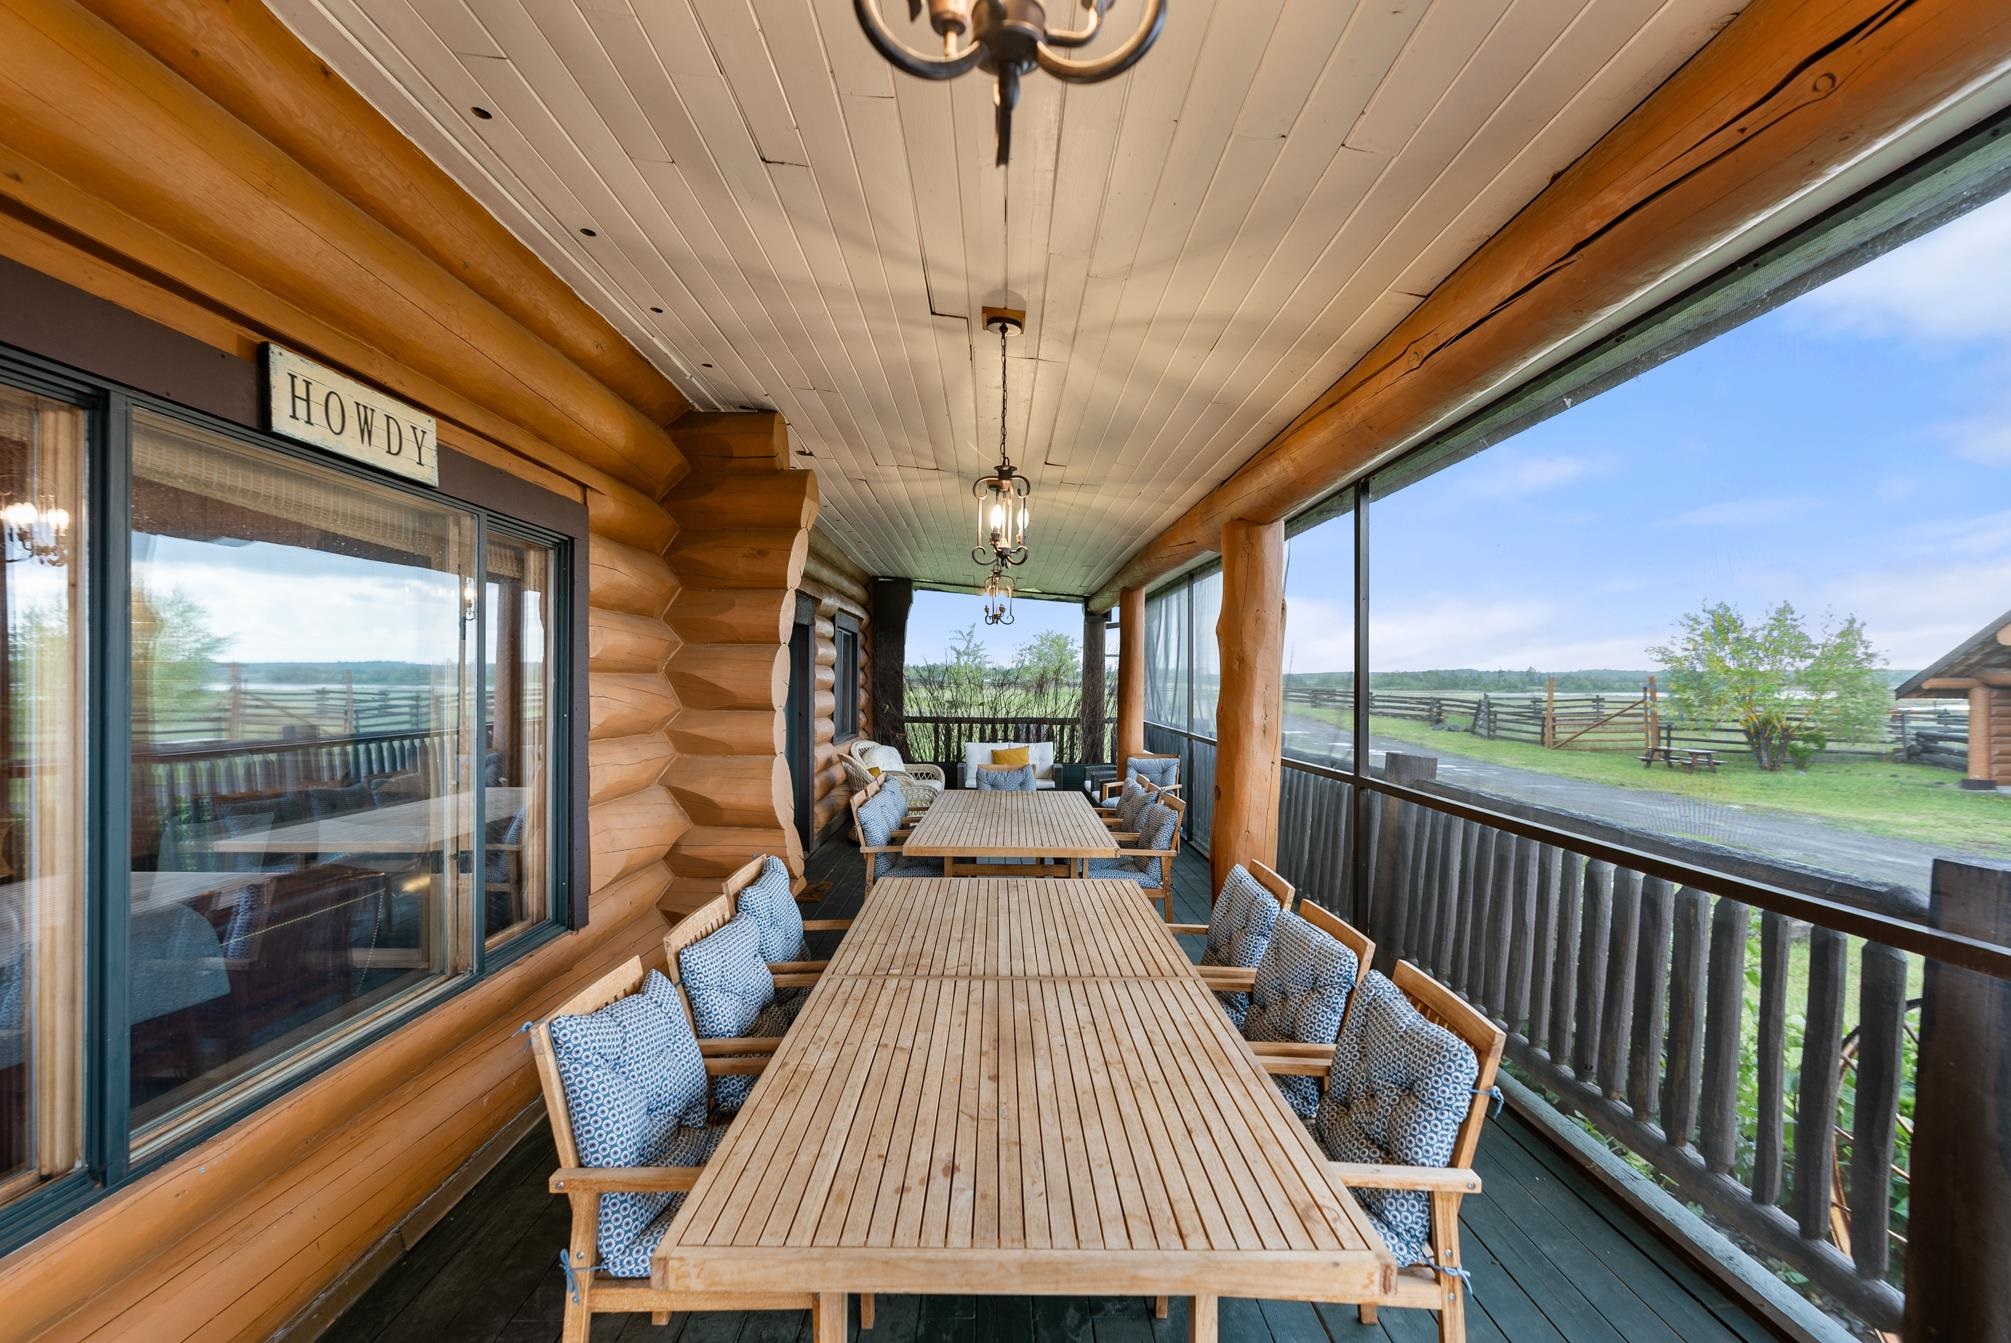 Ranch House Front porch. Fully screened. Dining Table for 16 people + sitting area.